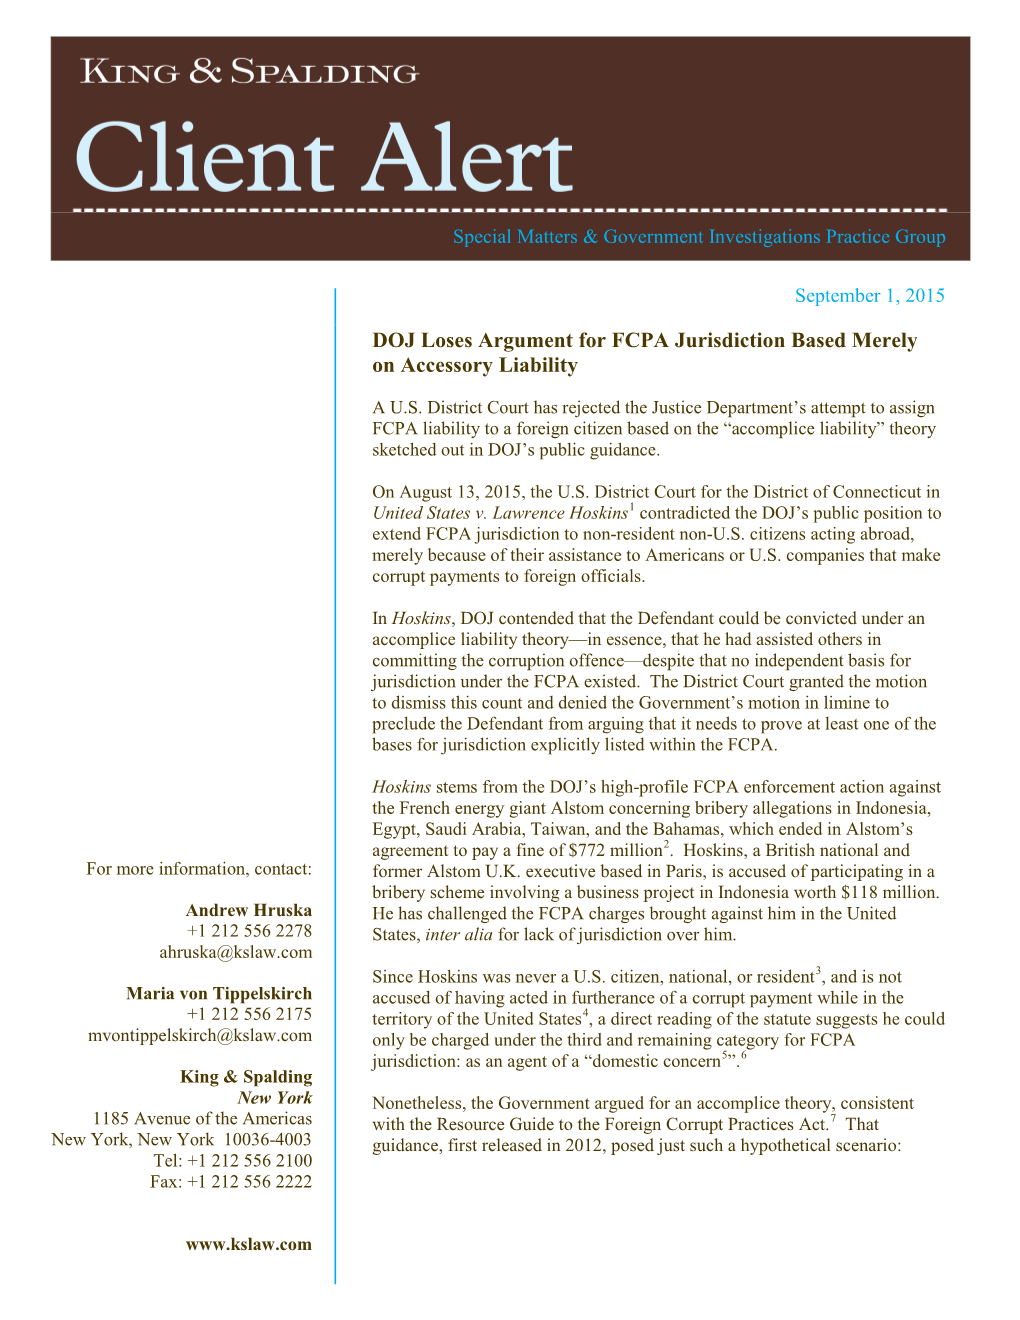 DOJ Loses Argument for FCPA Jurisdiction Based Merely on Accessory Liability